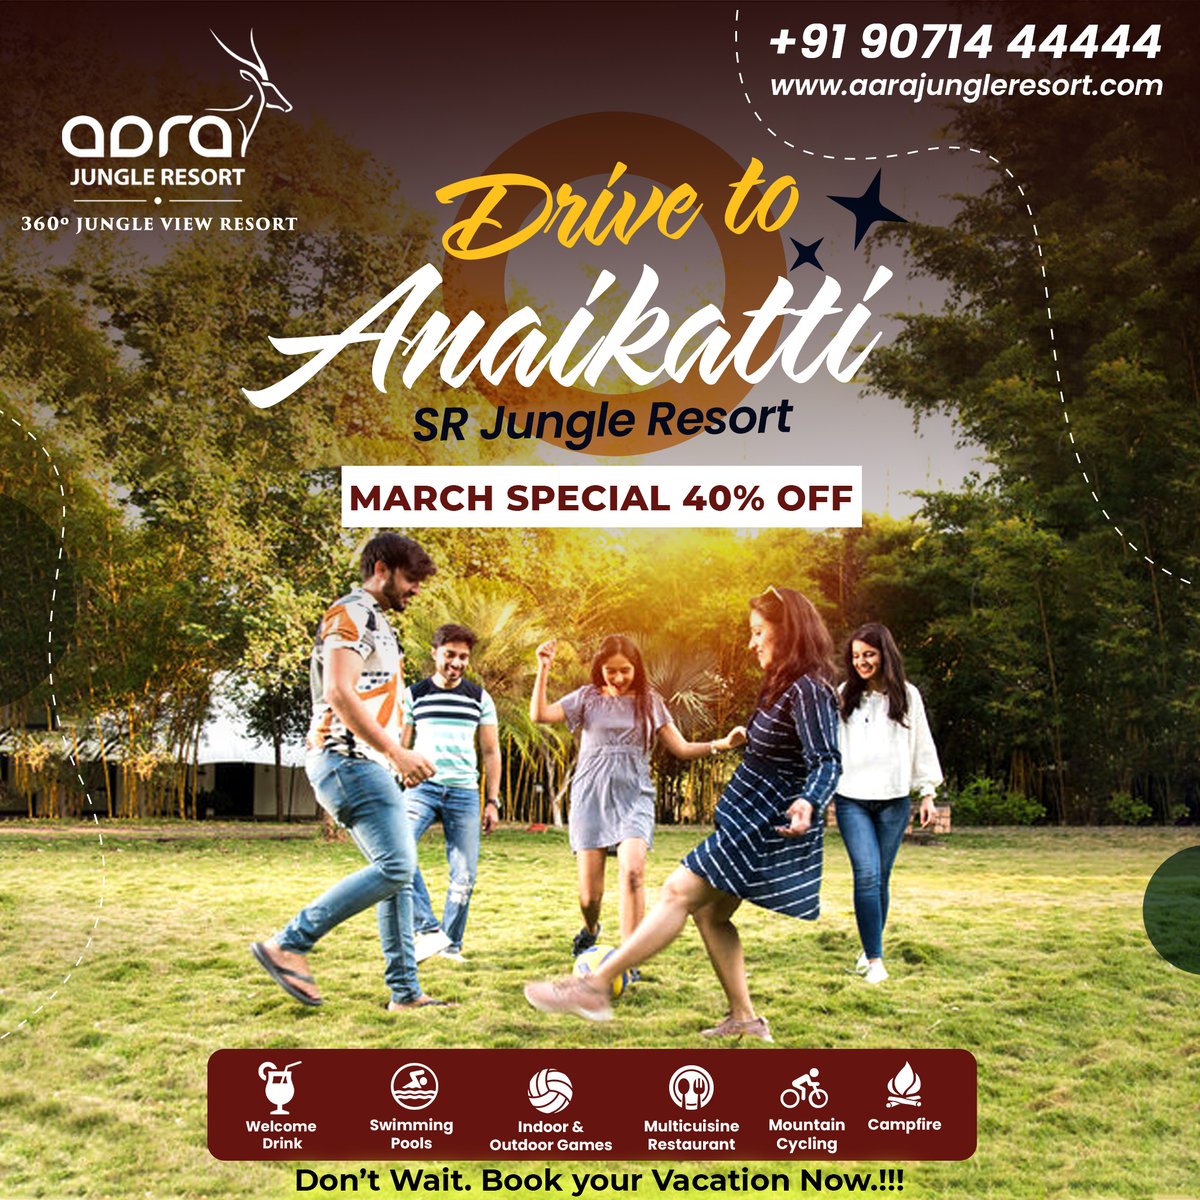 Take a break & delight yourself with a refreshing nature @ Aara Jungle Resort, Anaikatti, Coimbatore.

For Assistance:
+91 90714 44444
aarajungleresort.com
g.page/aara-jungle-re…

#coffeekudil #aarajungleresort #anaikattiresorts #karupatticoffee #coimbatore #aarajungleresort